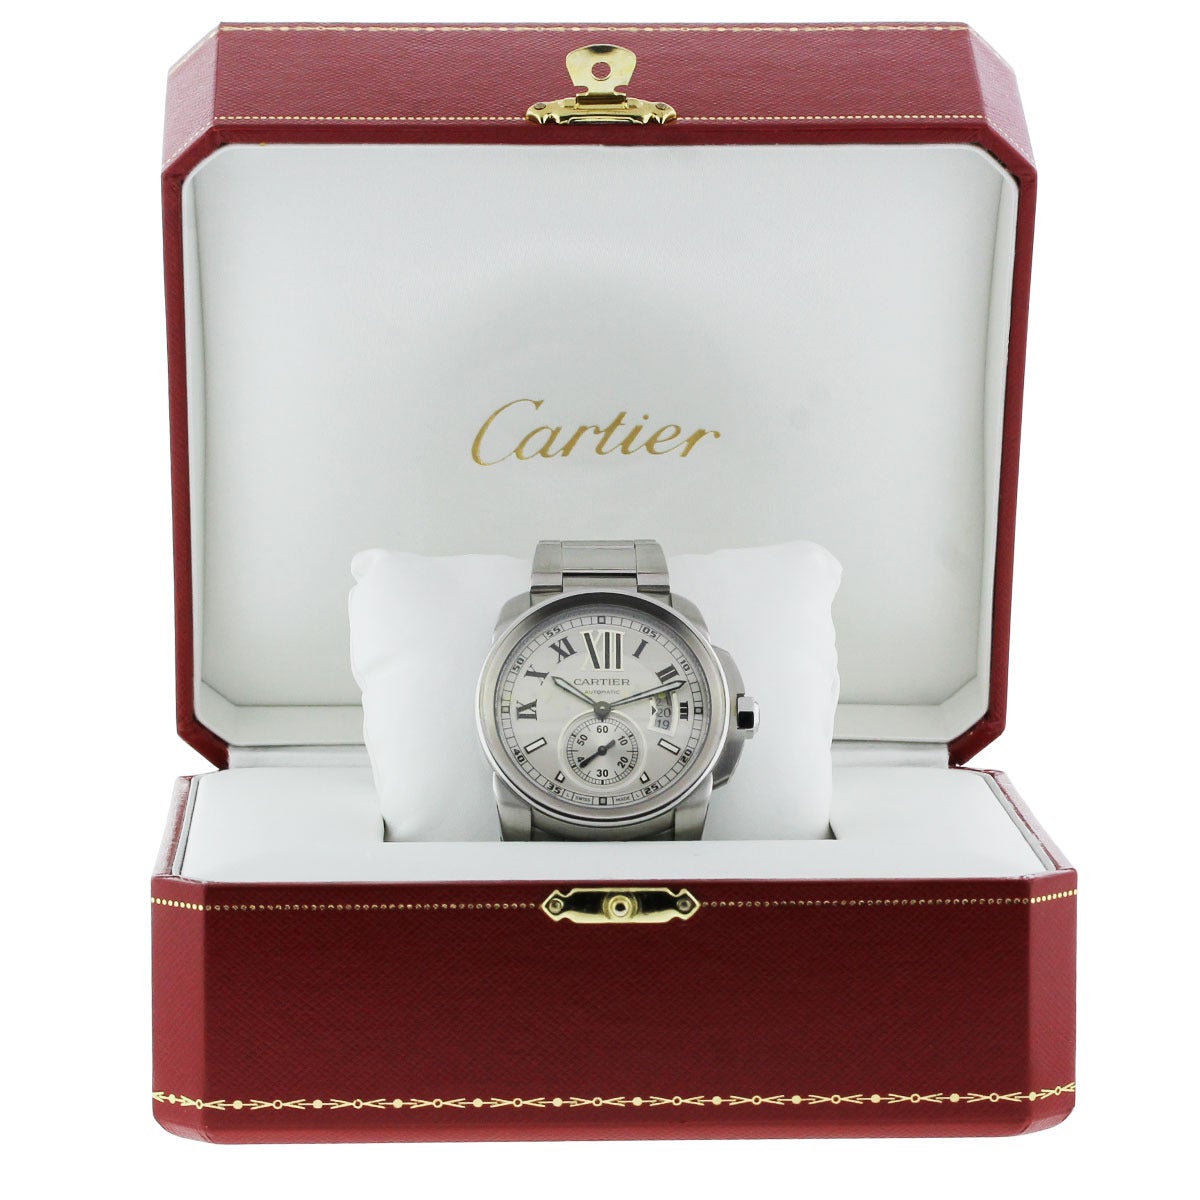 Cartier Stainless Steel Calibre Chronograph Wristwatch Ref 3389 3